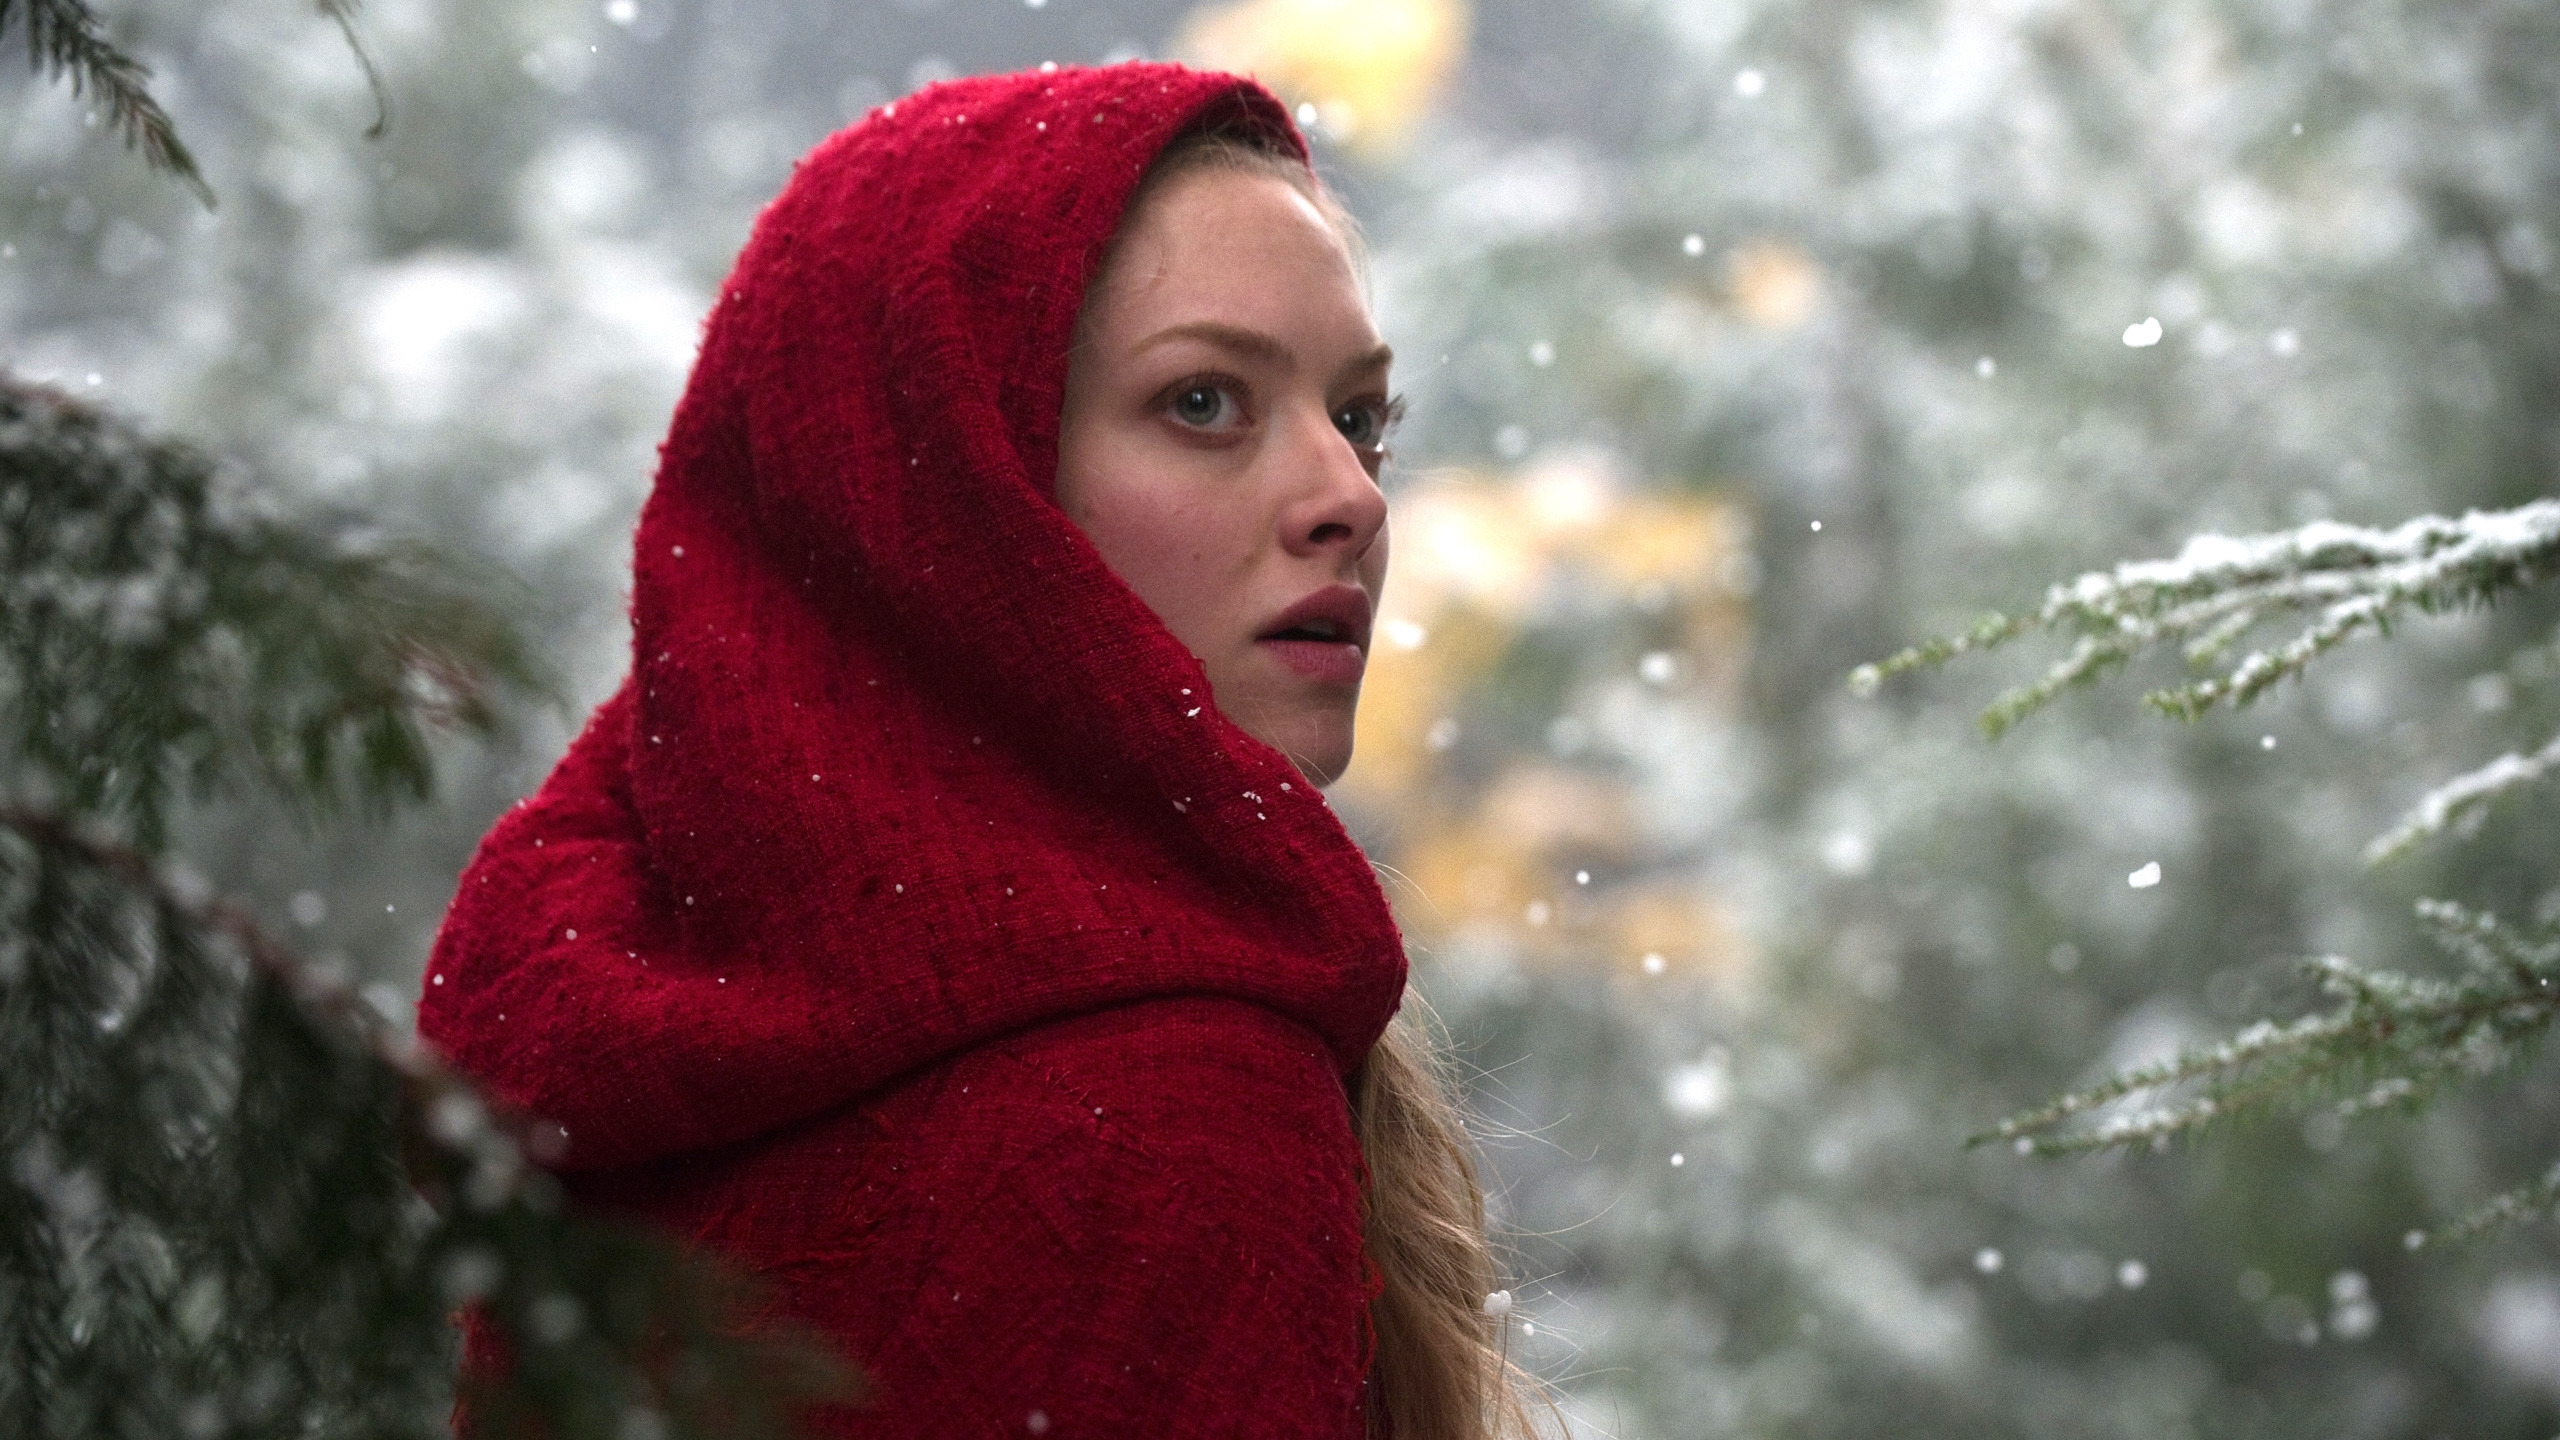 Red Riding Hood Movie for 2560x1440 HDTV resolution